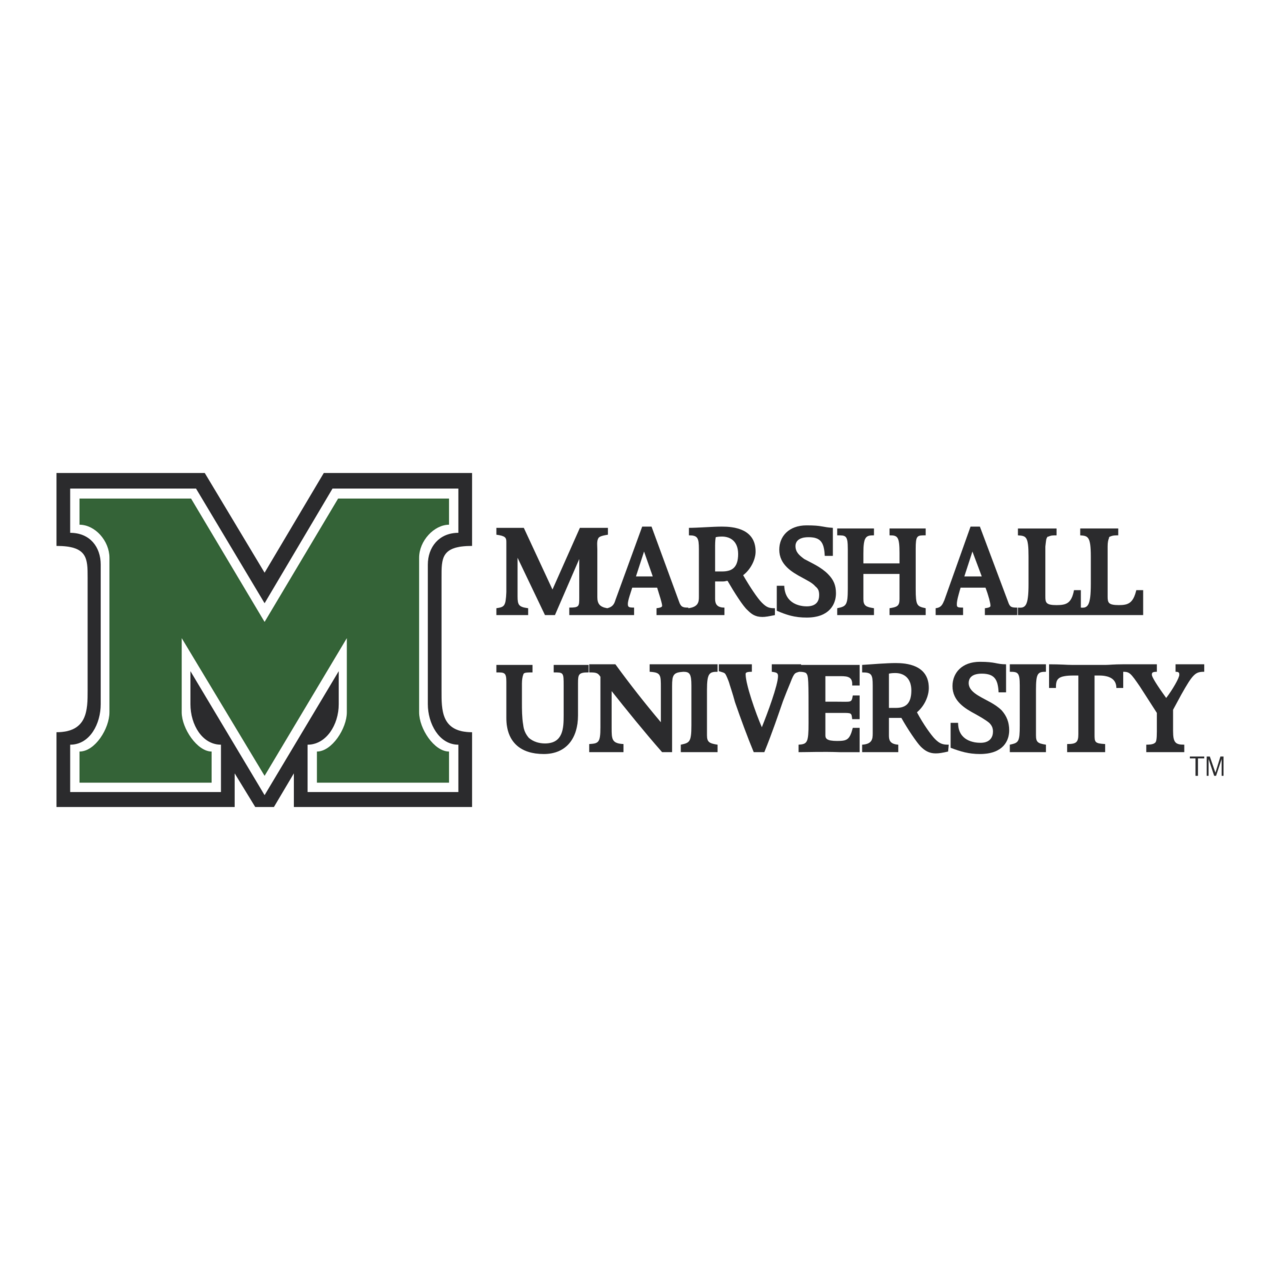 Download Marshall University Logo PNG and Vector (PDF, SVG, Ai, EPS) Free